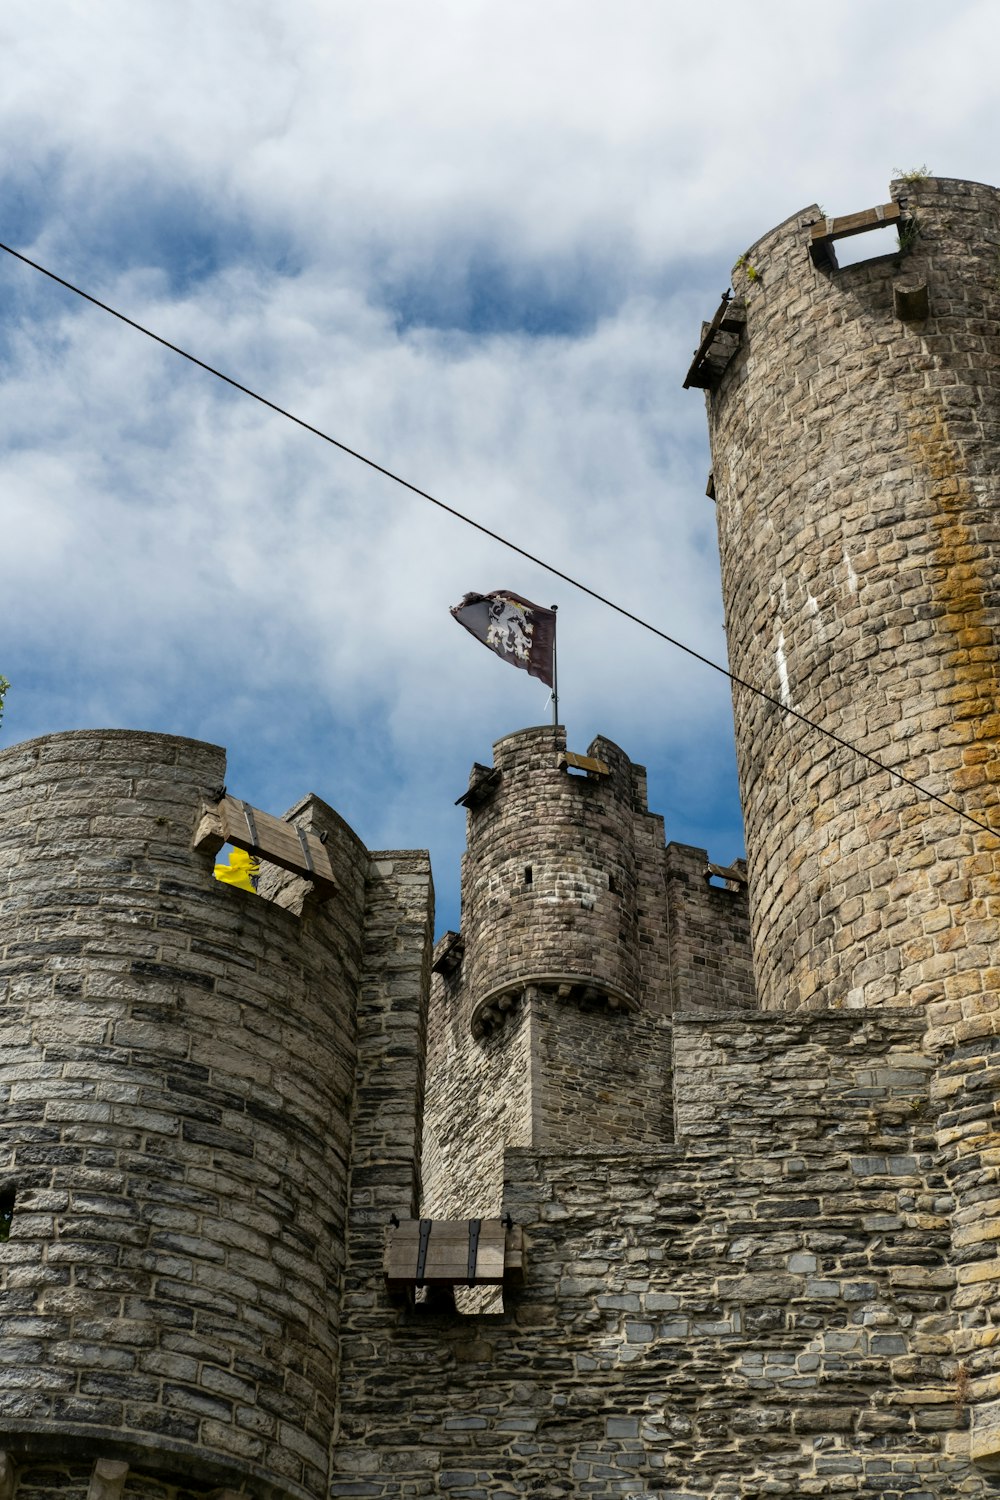 a stone castle with a flag on top